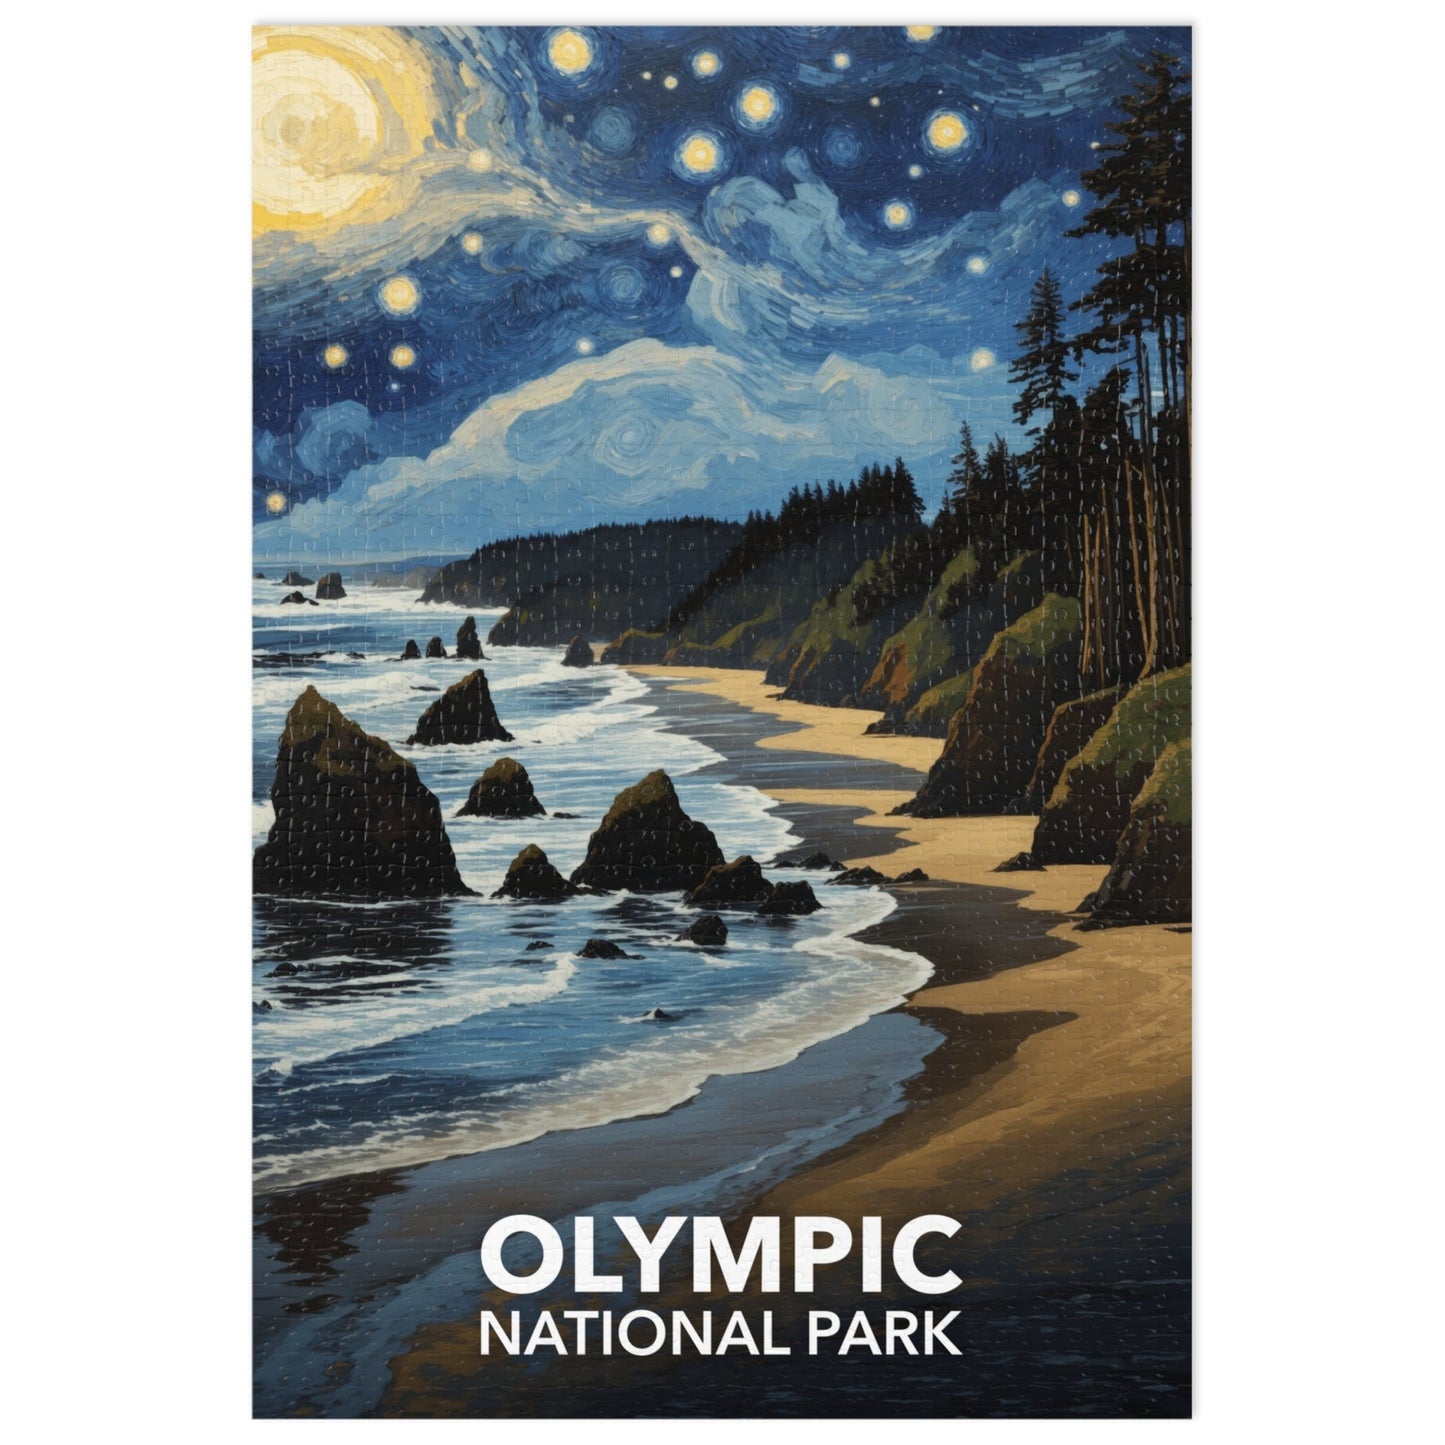 Olympic National Park Jigsaw Puzzle - The Starry Night